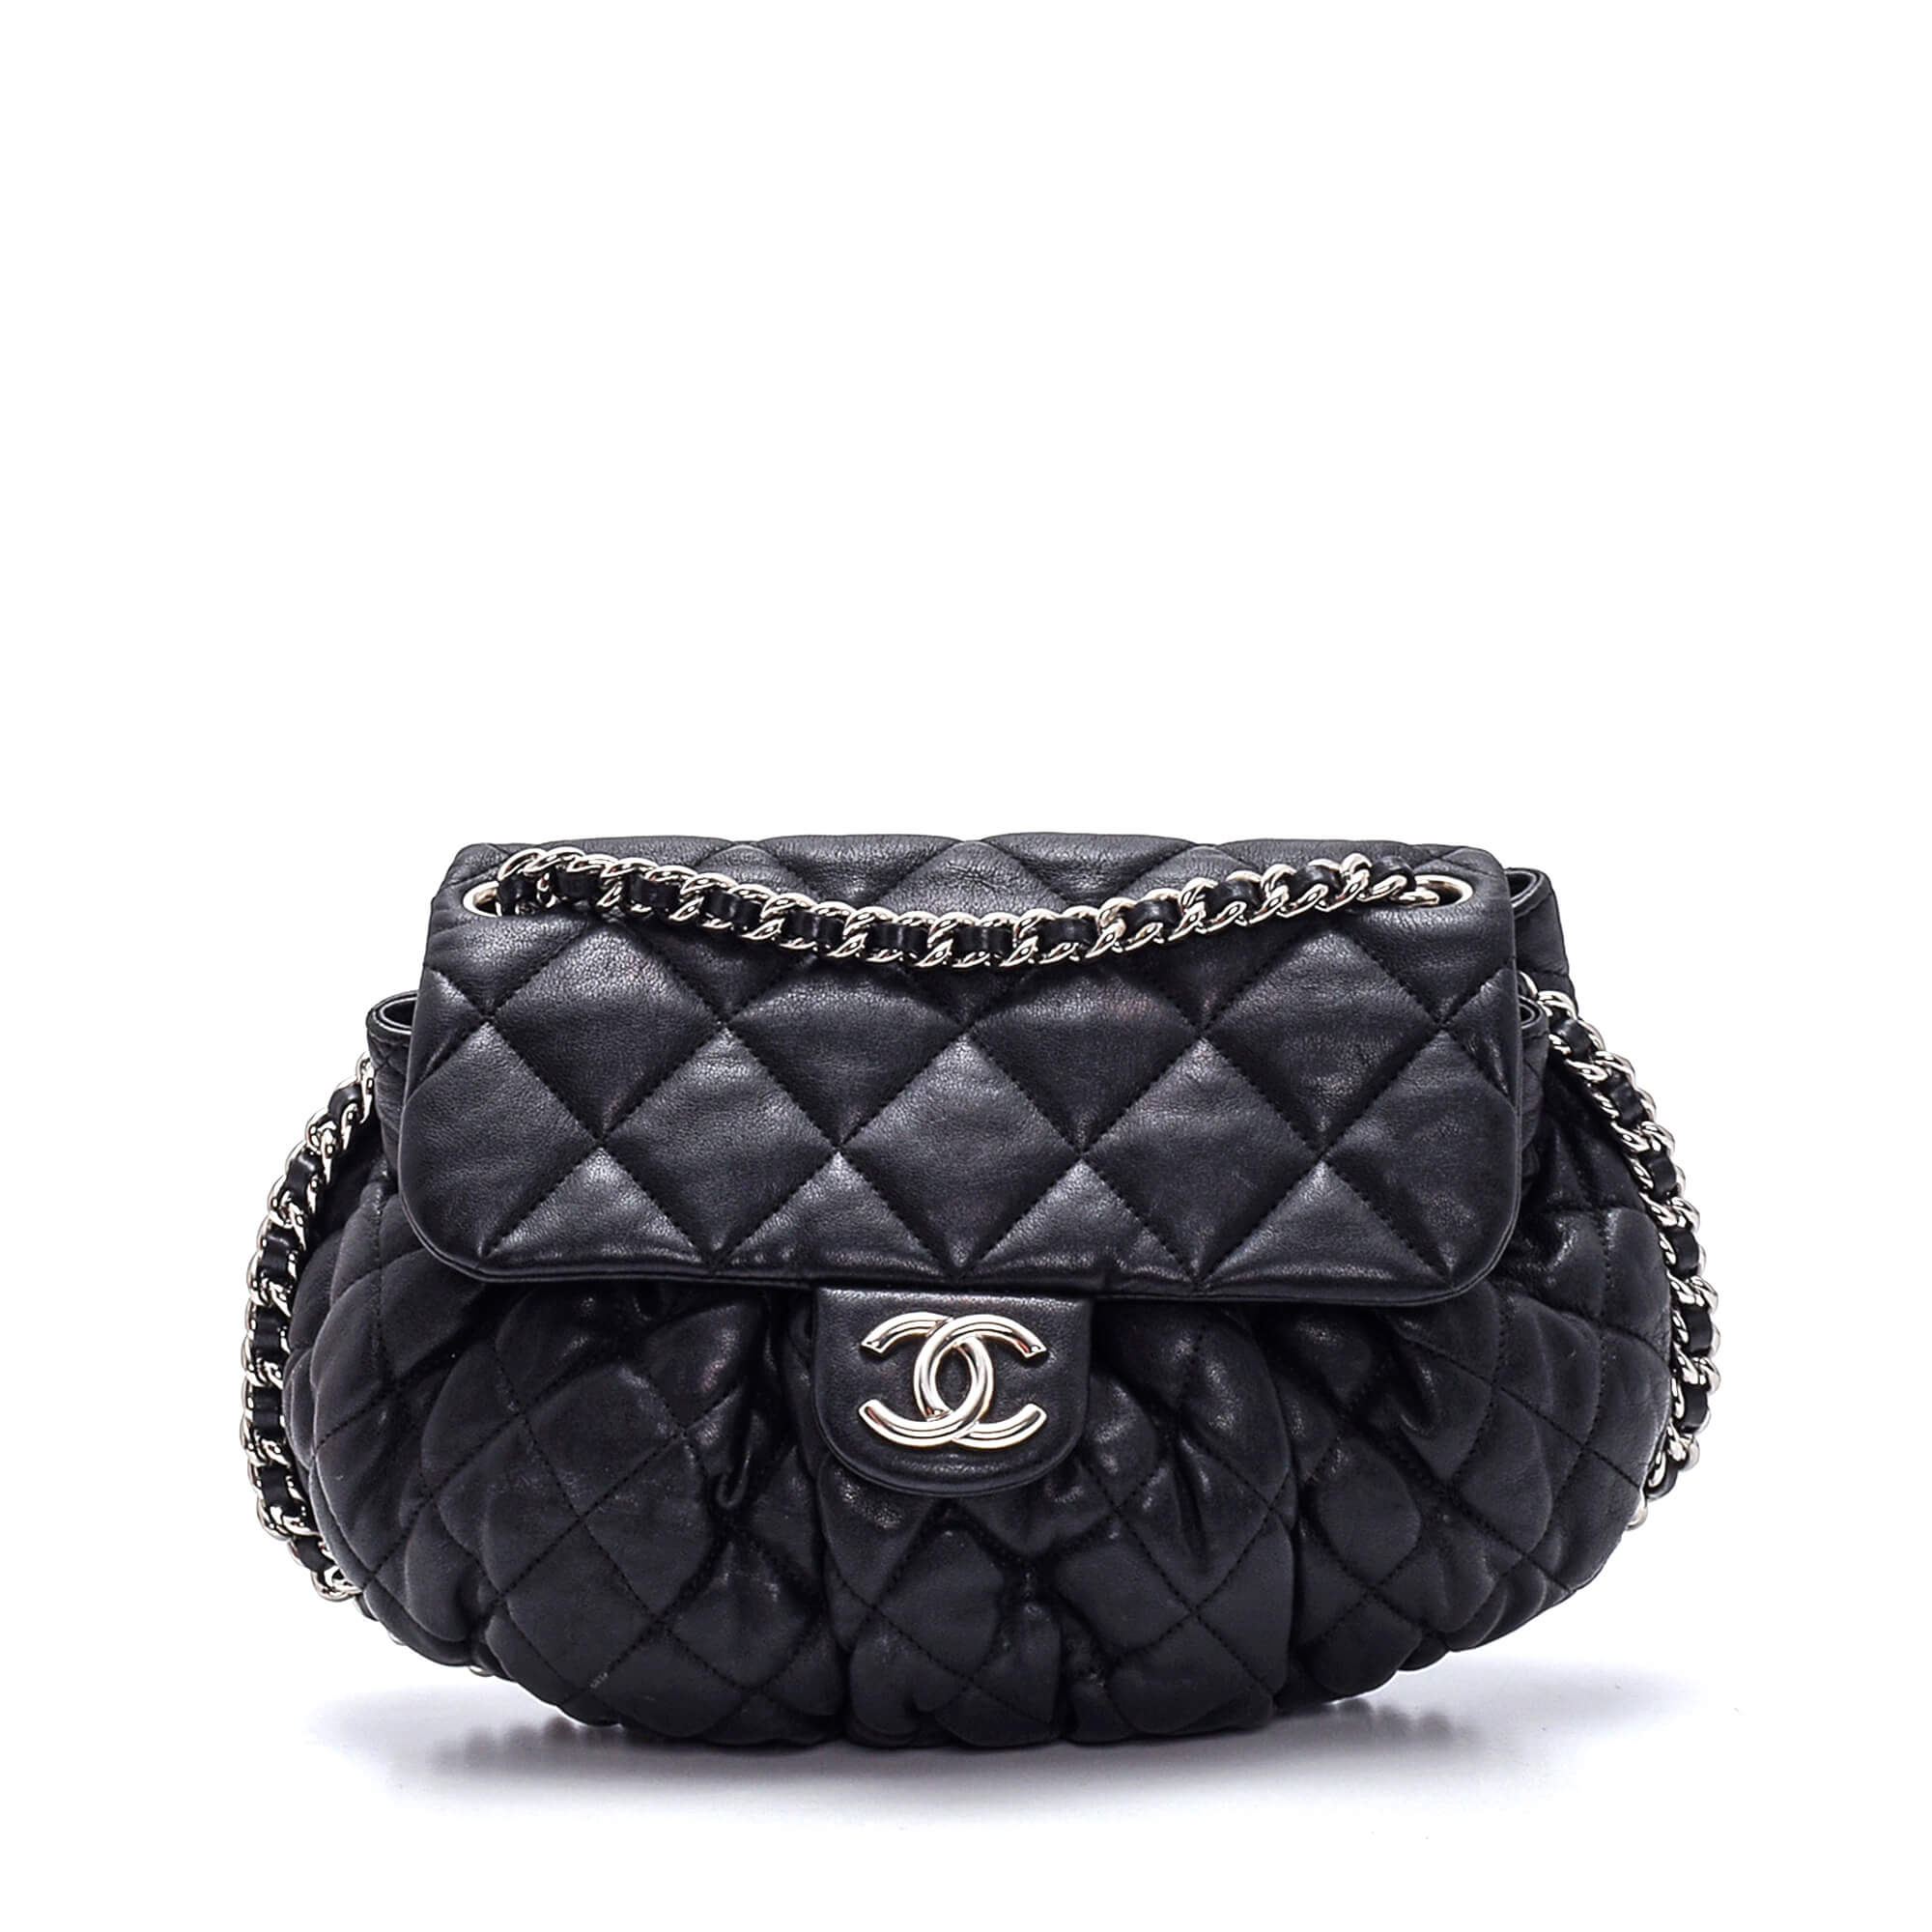 Chanel - Black Quilted Lambskin Leather Chain Around Messenger Bag